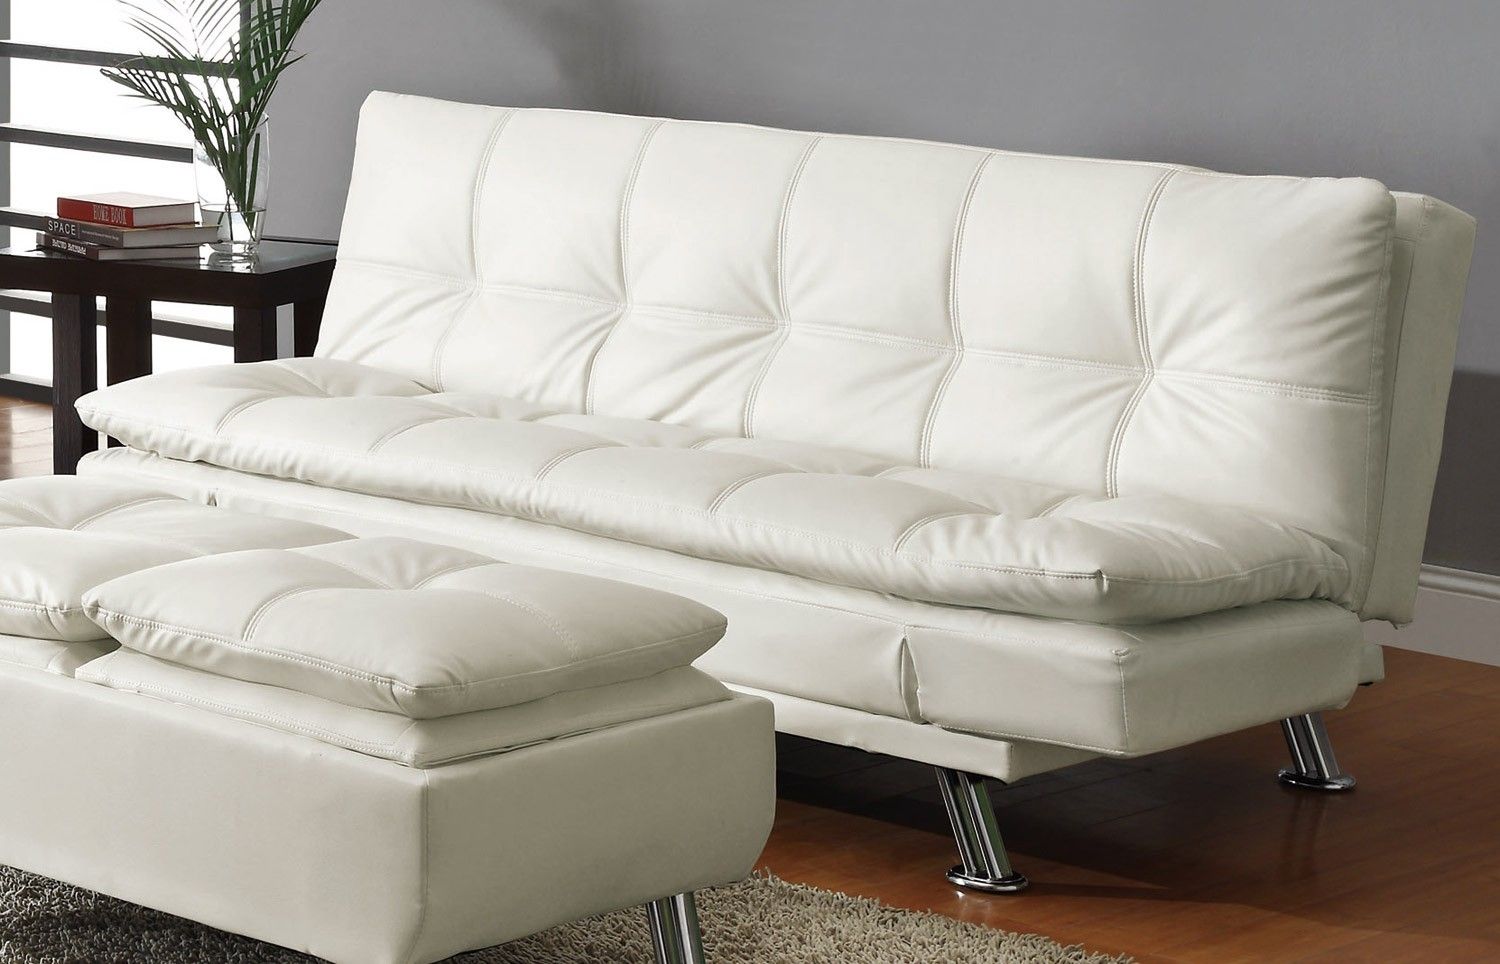 Most Comfortable Sofas Homesfeed Inside Comfortable Sofas And Chairs (View 3 of 15)